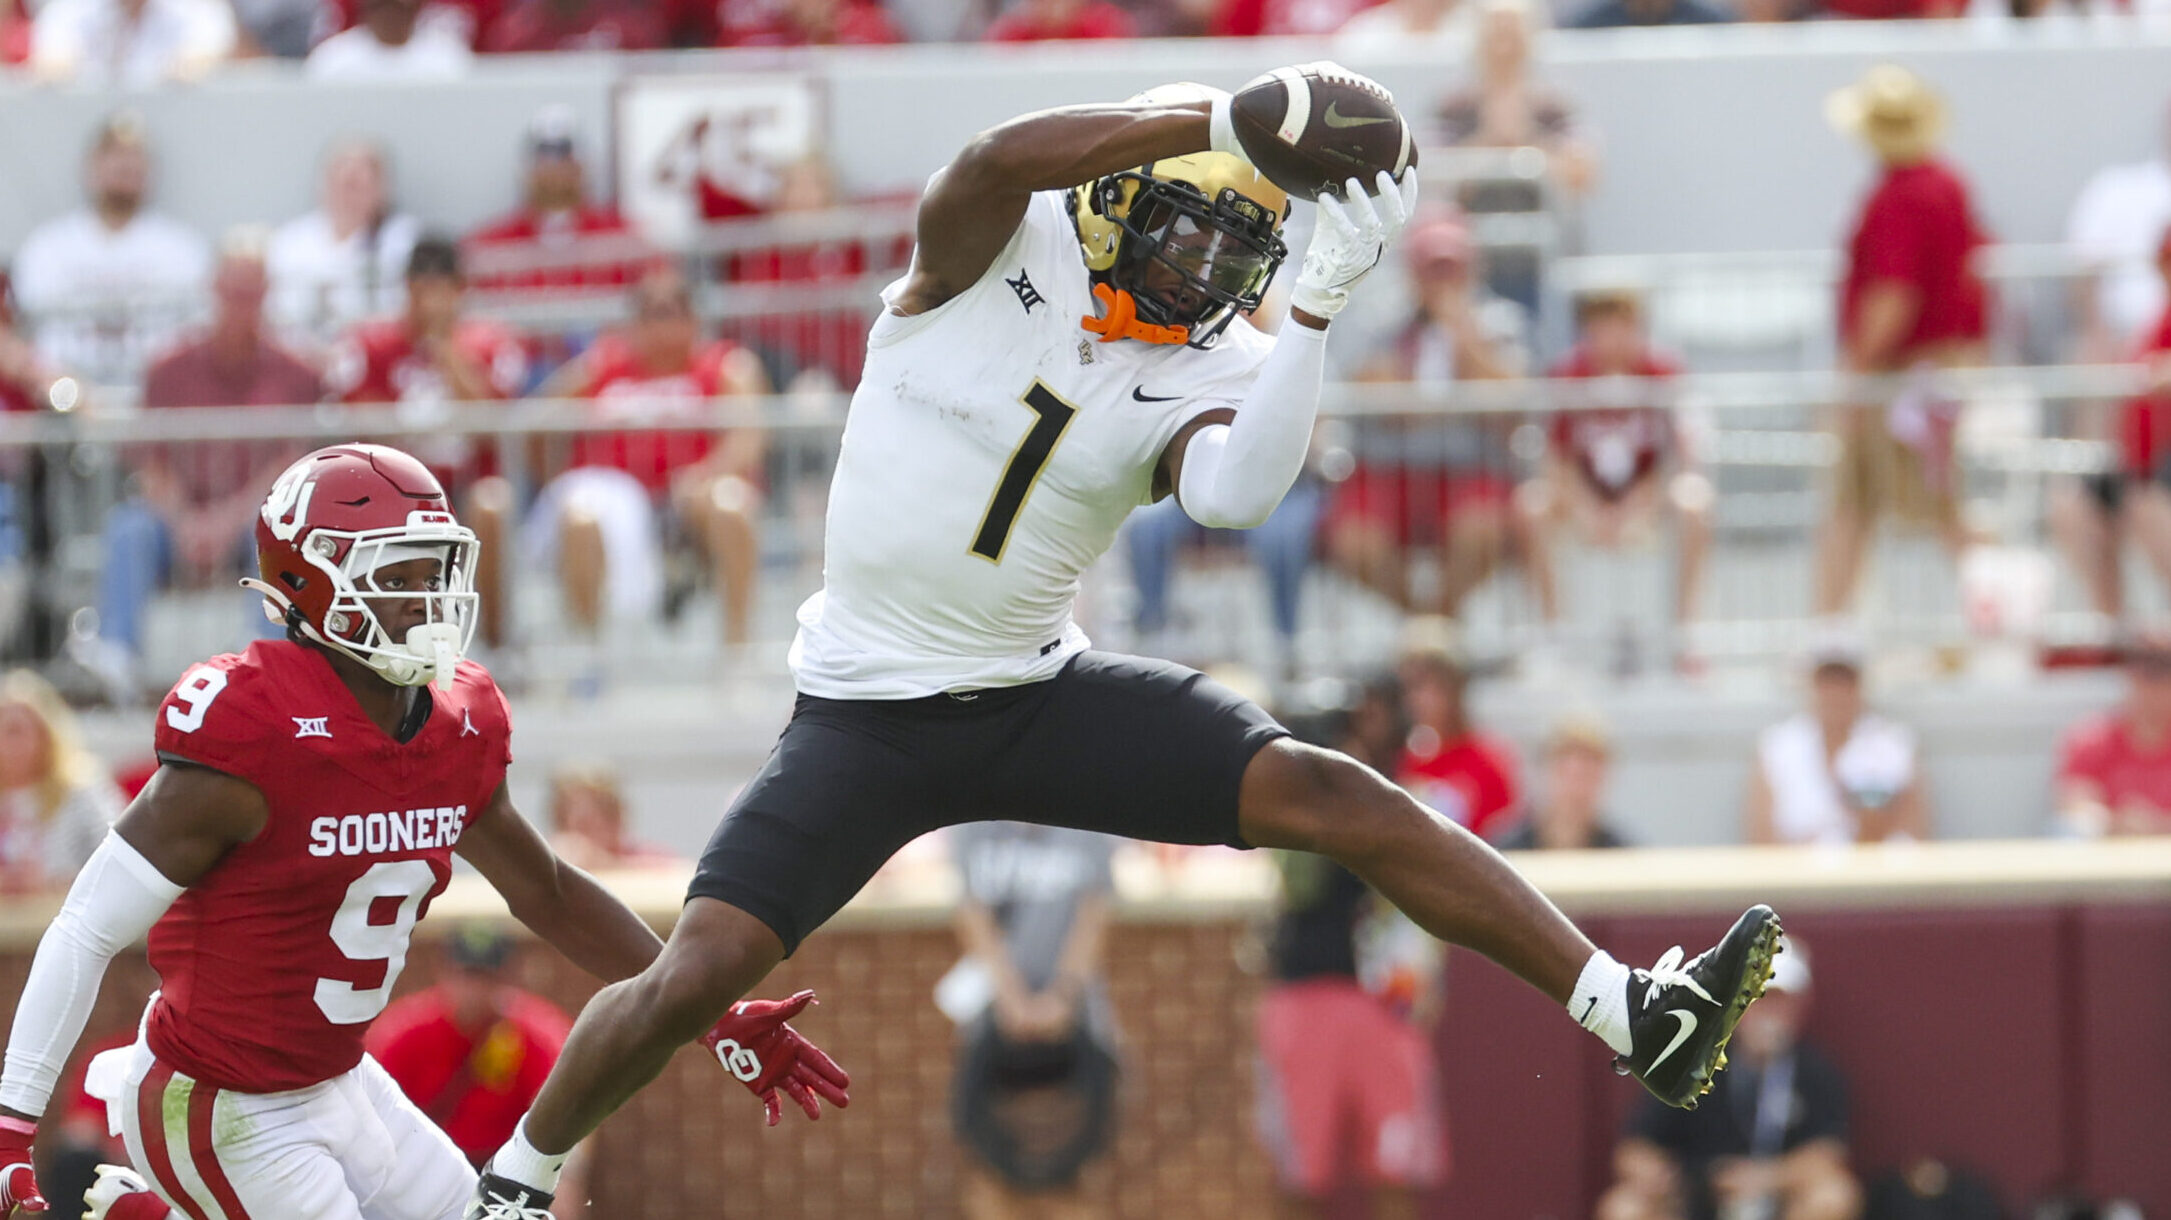 UCF wide receiver Javon Baker makes a leaping catch